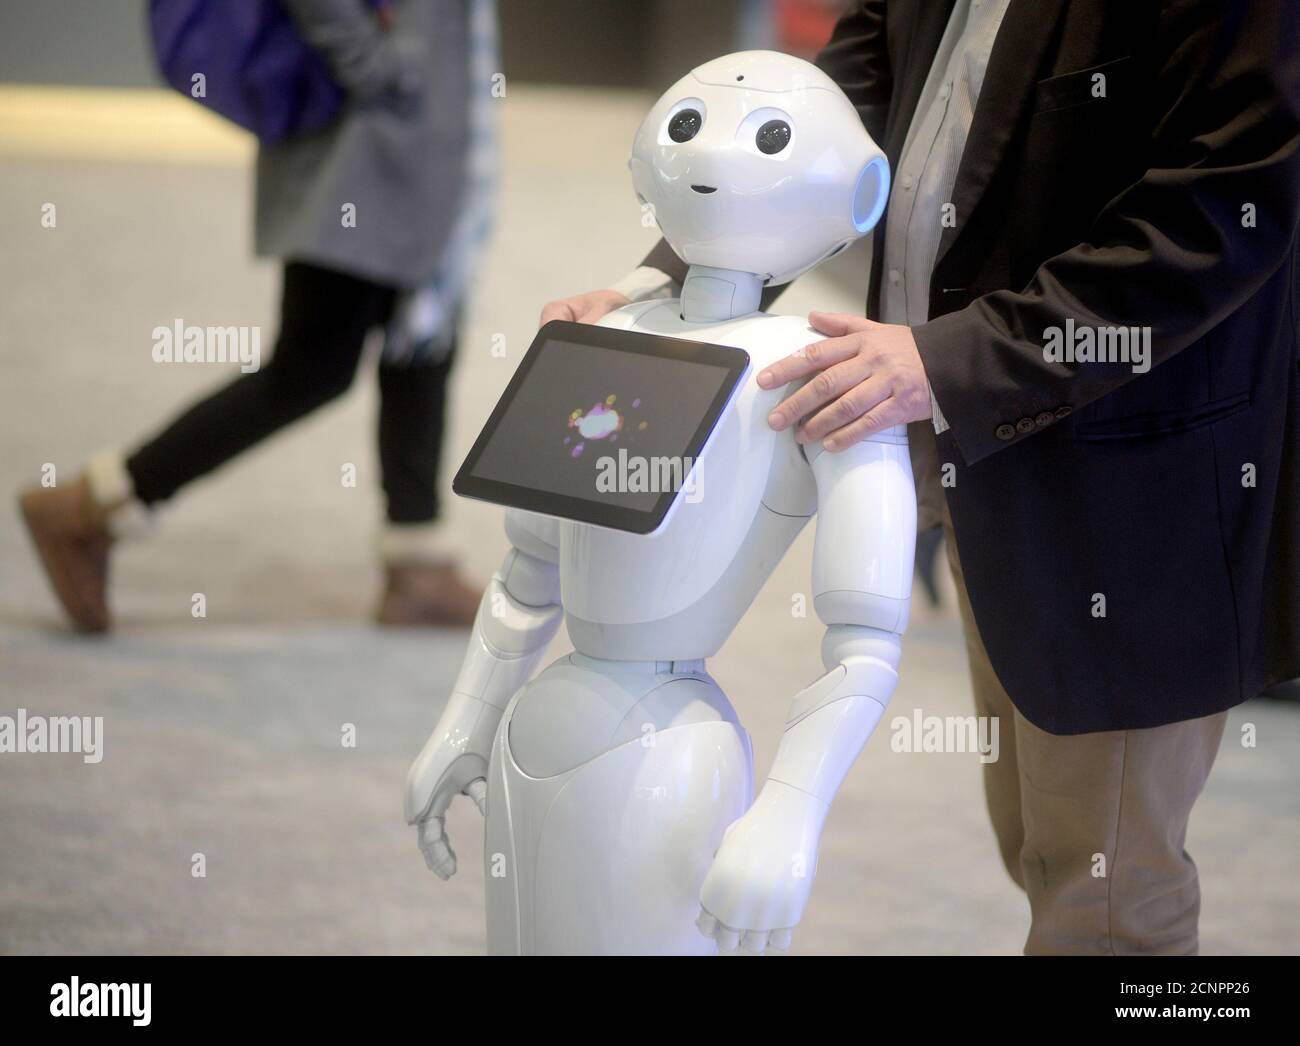 Humanoid robot Pepper is seen at IBM exhibition stand during the CeBIT trade fair, world's biggest computer and software in Hannover March 2016. REUTERS/Nigel Treblin Stock Photo - Alamy